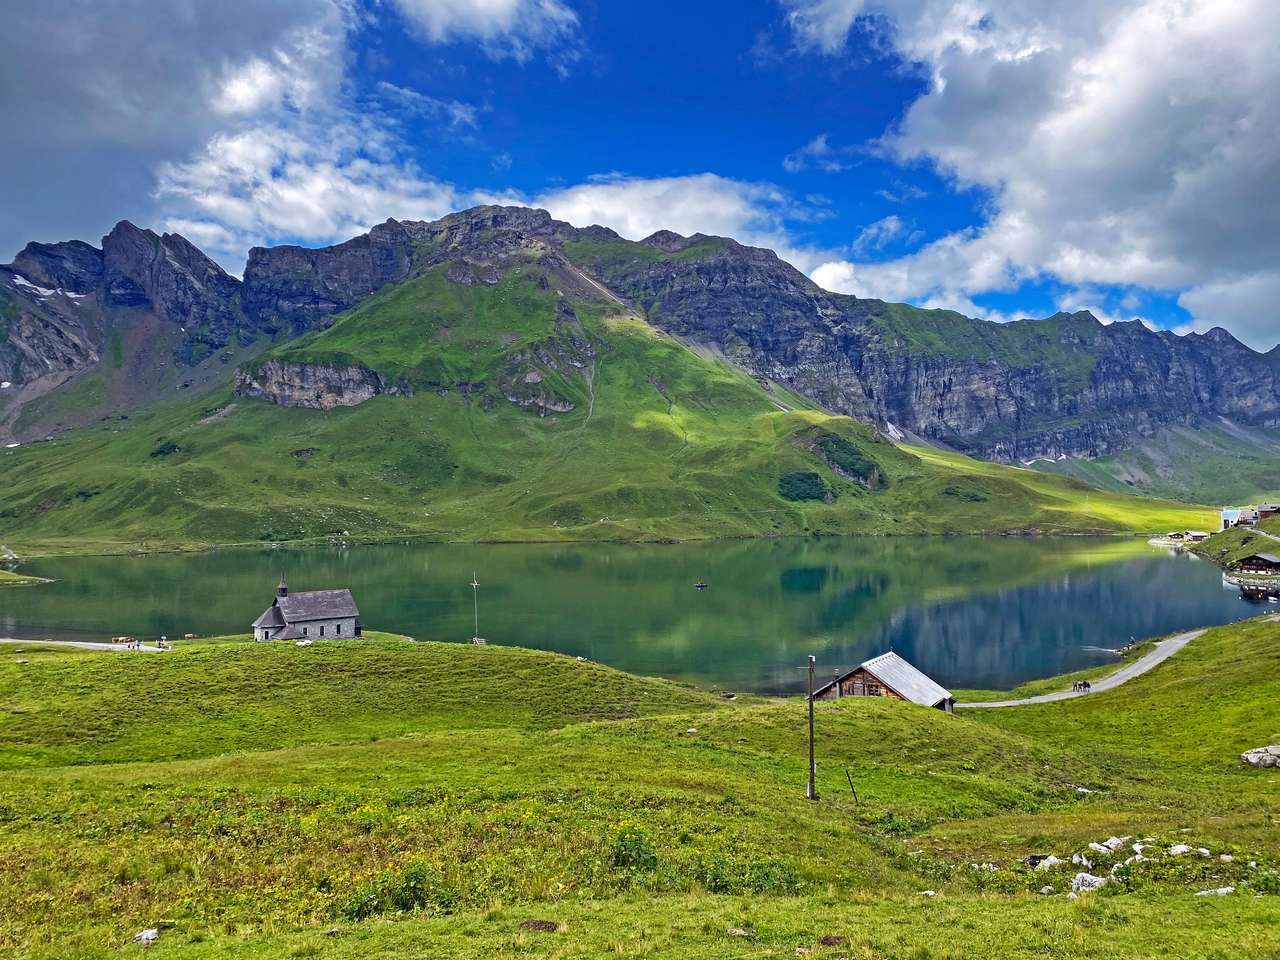 The alpine lake Melchsee online puzzle